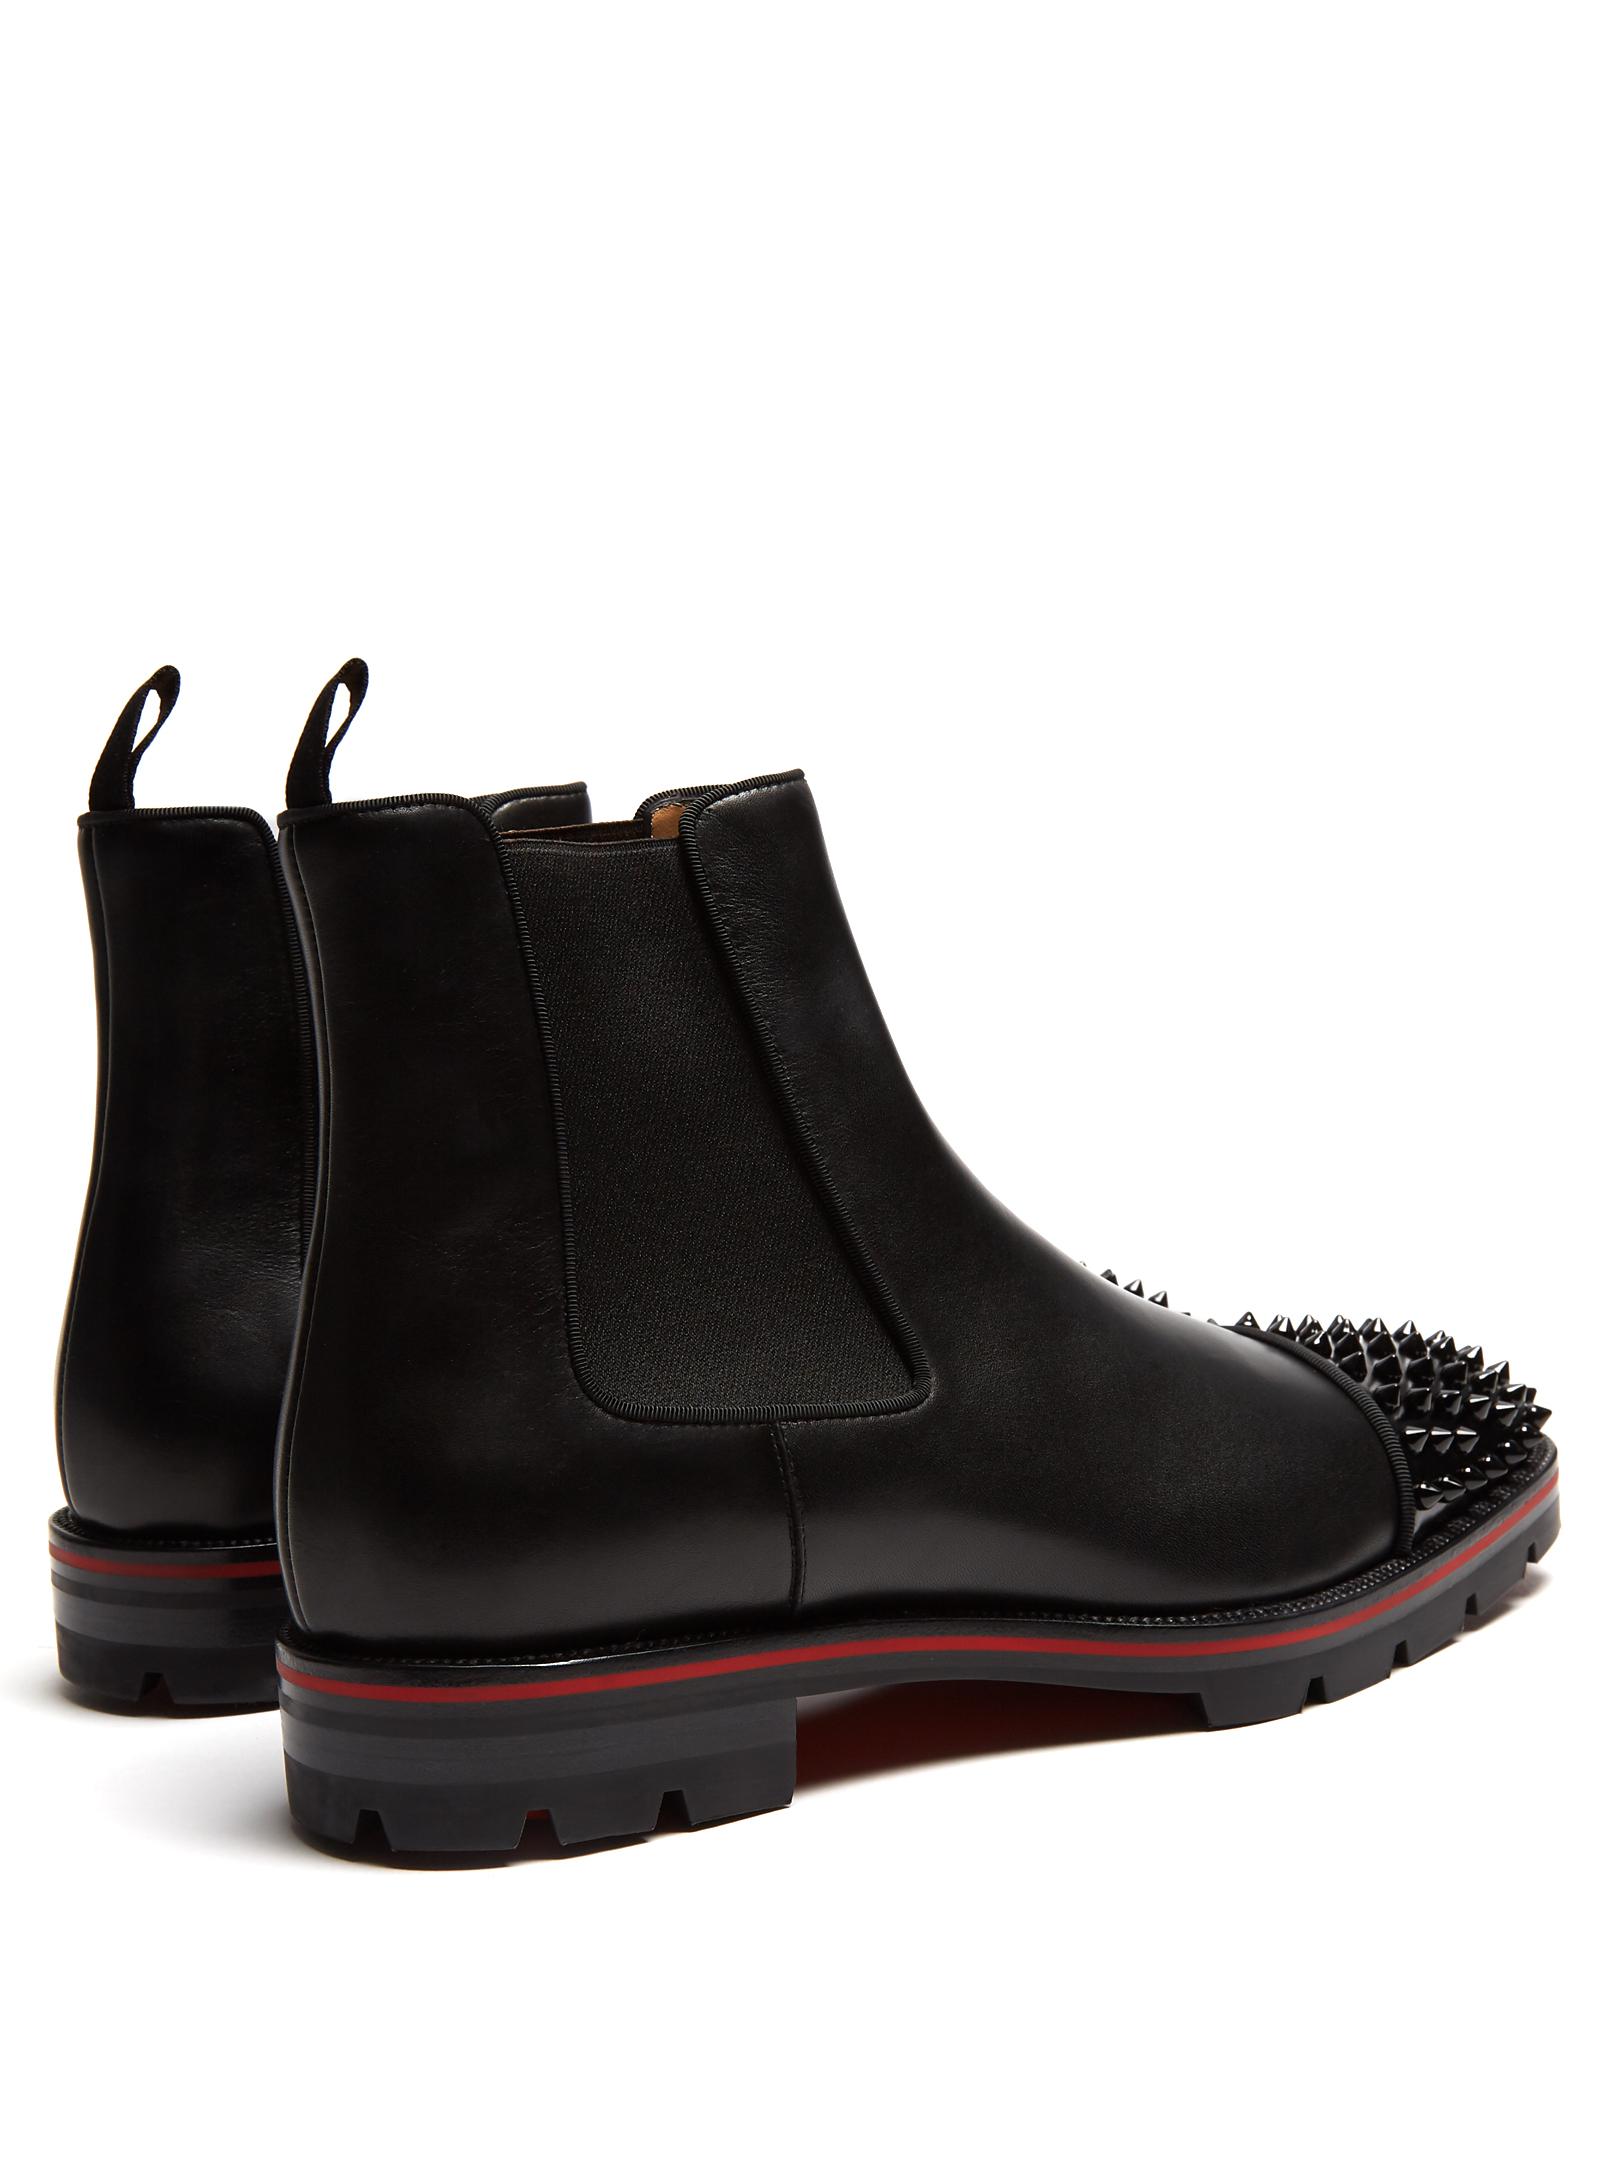 Christian Louboutin Melon Leather Chelsea Boots in Black for Men - Lyst